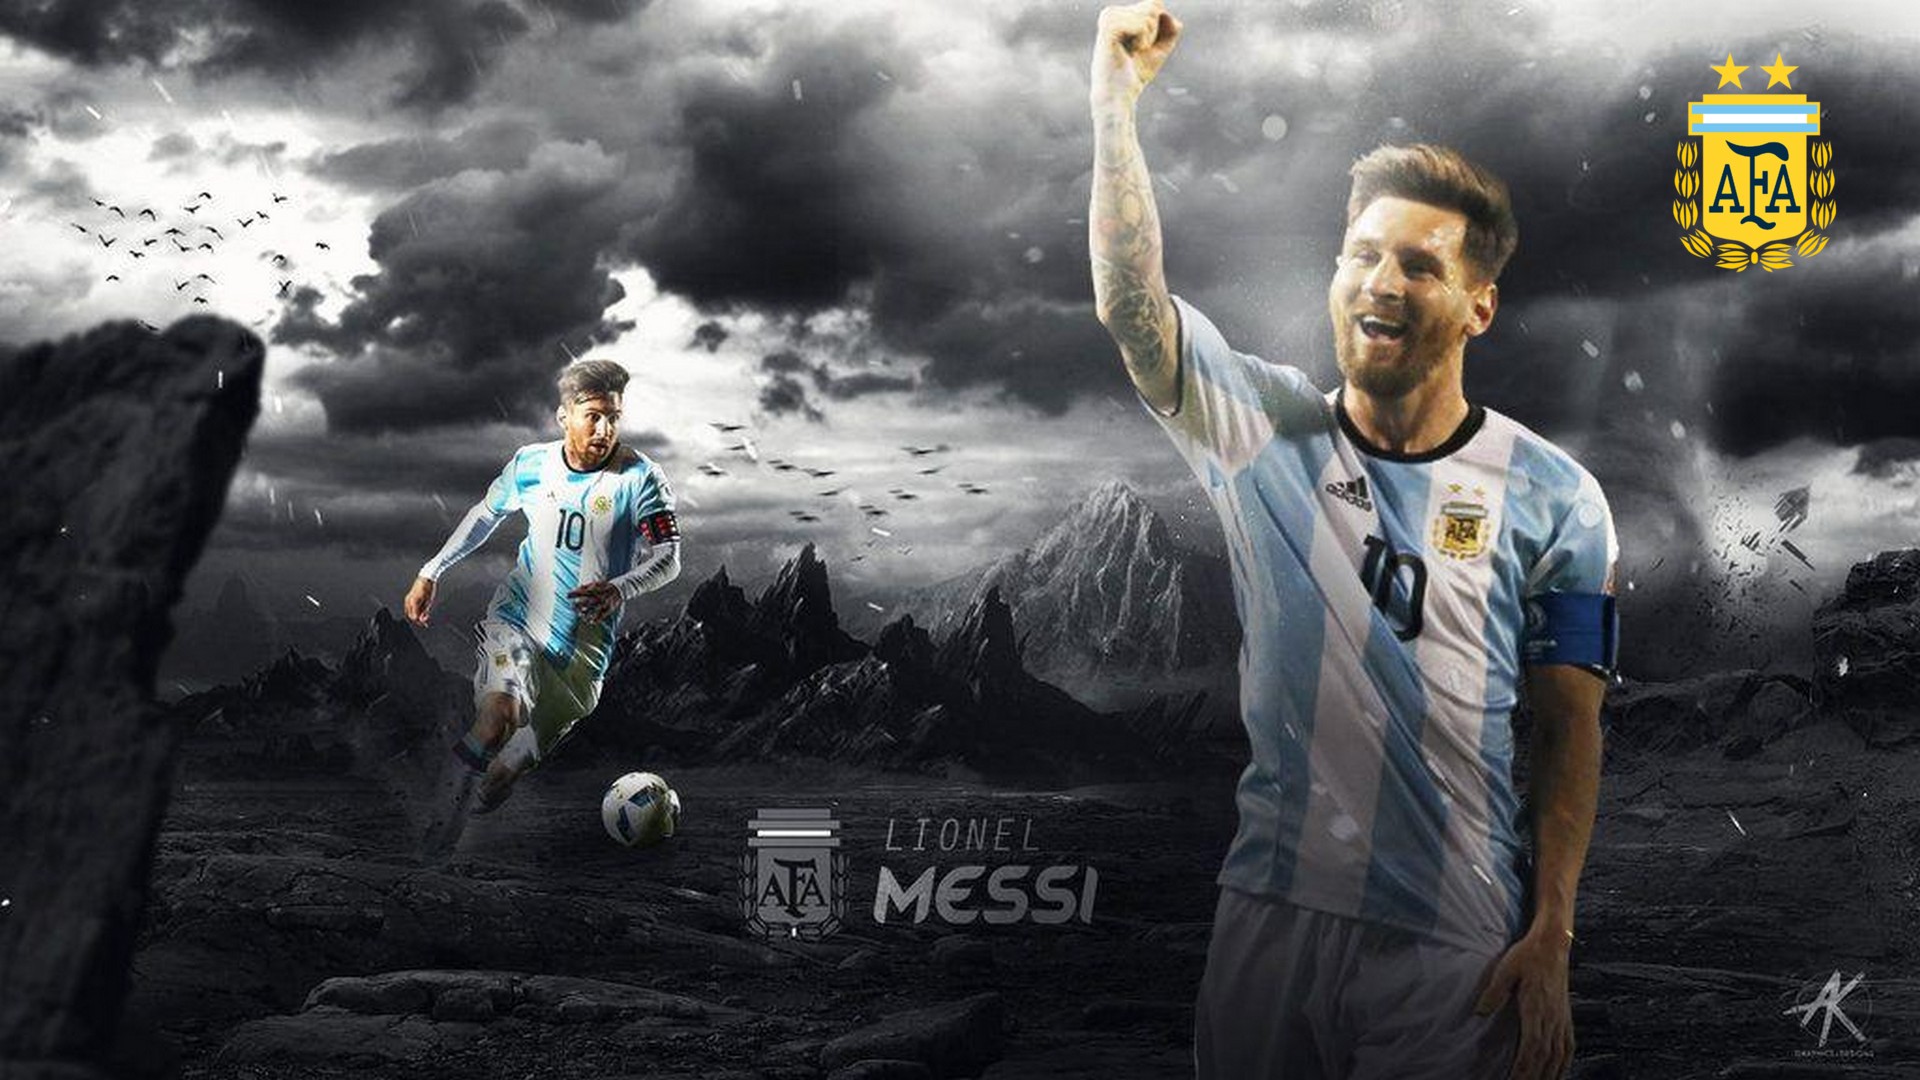 Wallpapers Hd Messi Argentina With Resolution Pixel - Messi Argentina Wallpaper Hd - HD Wallpaper 